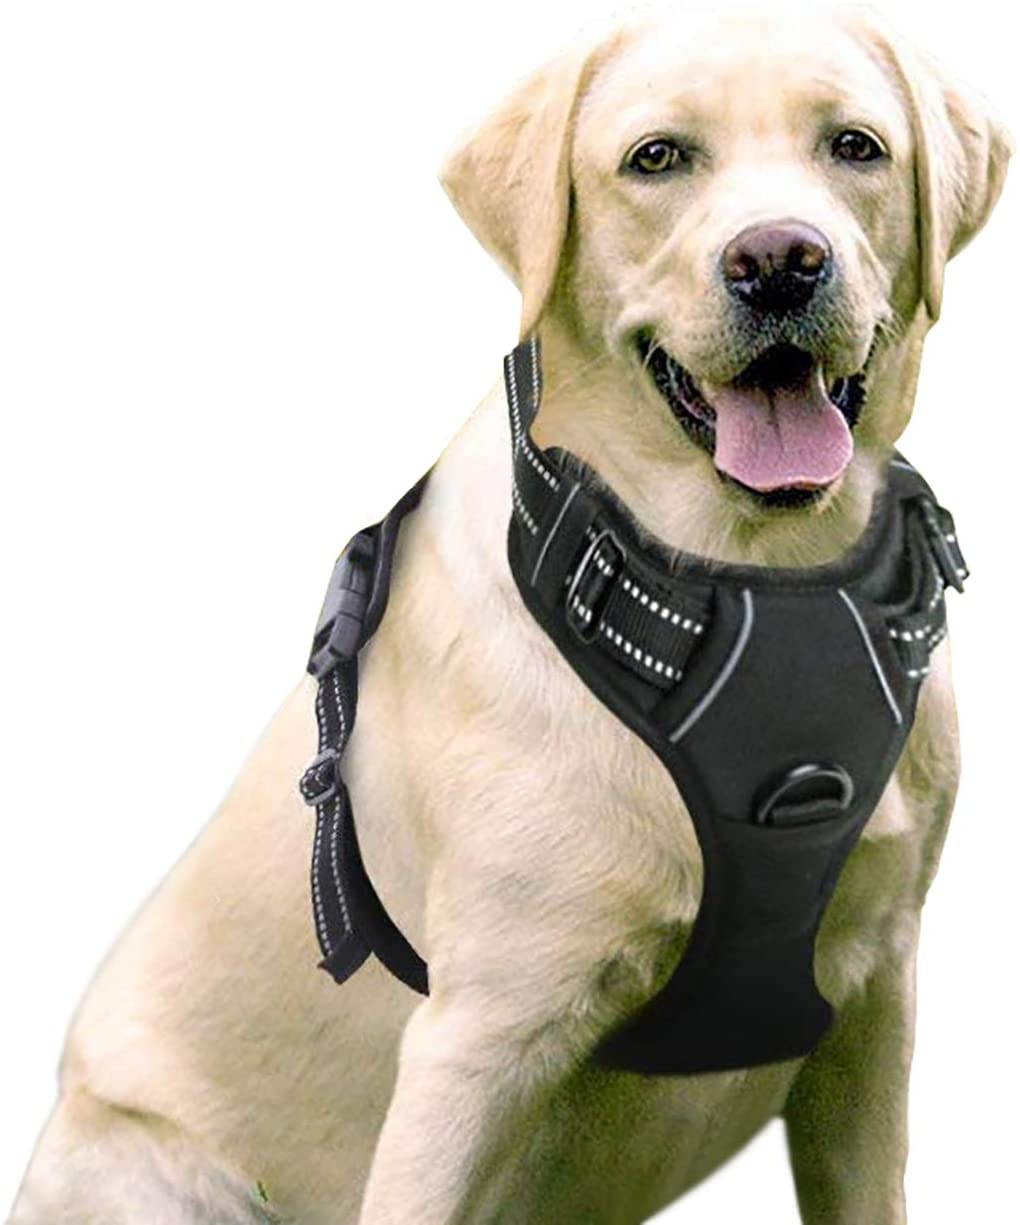 Brawdeals No Pull Dog Harness, Oxford Padded Soft Vest Walking Pet Harness for Dogs Easy Control